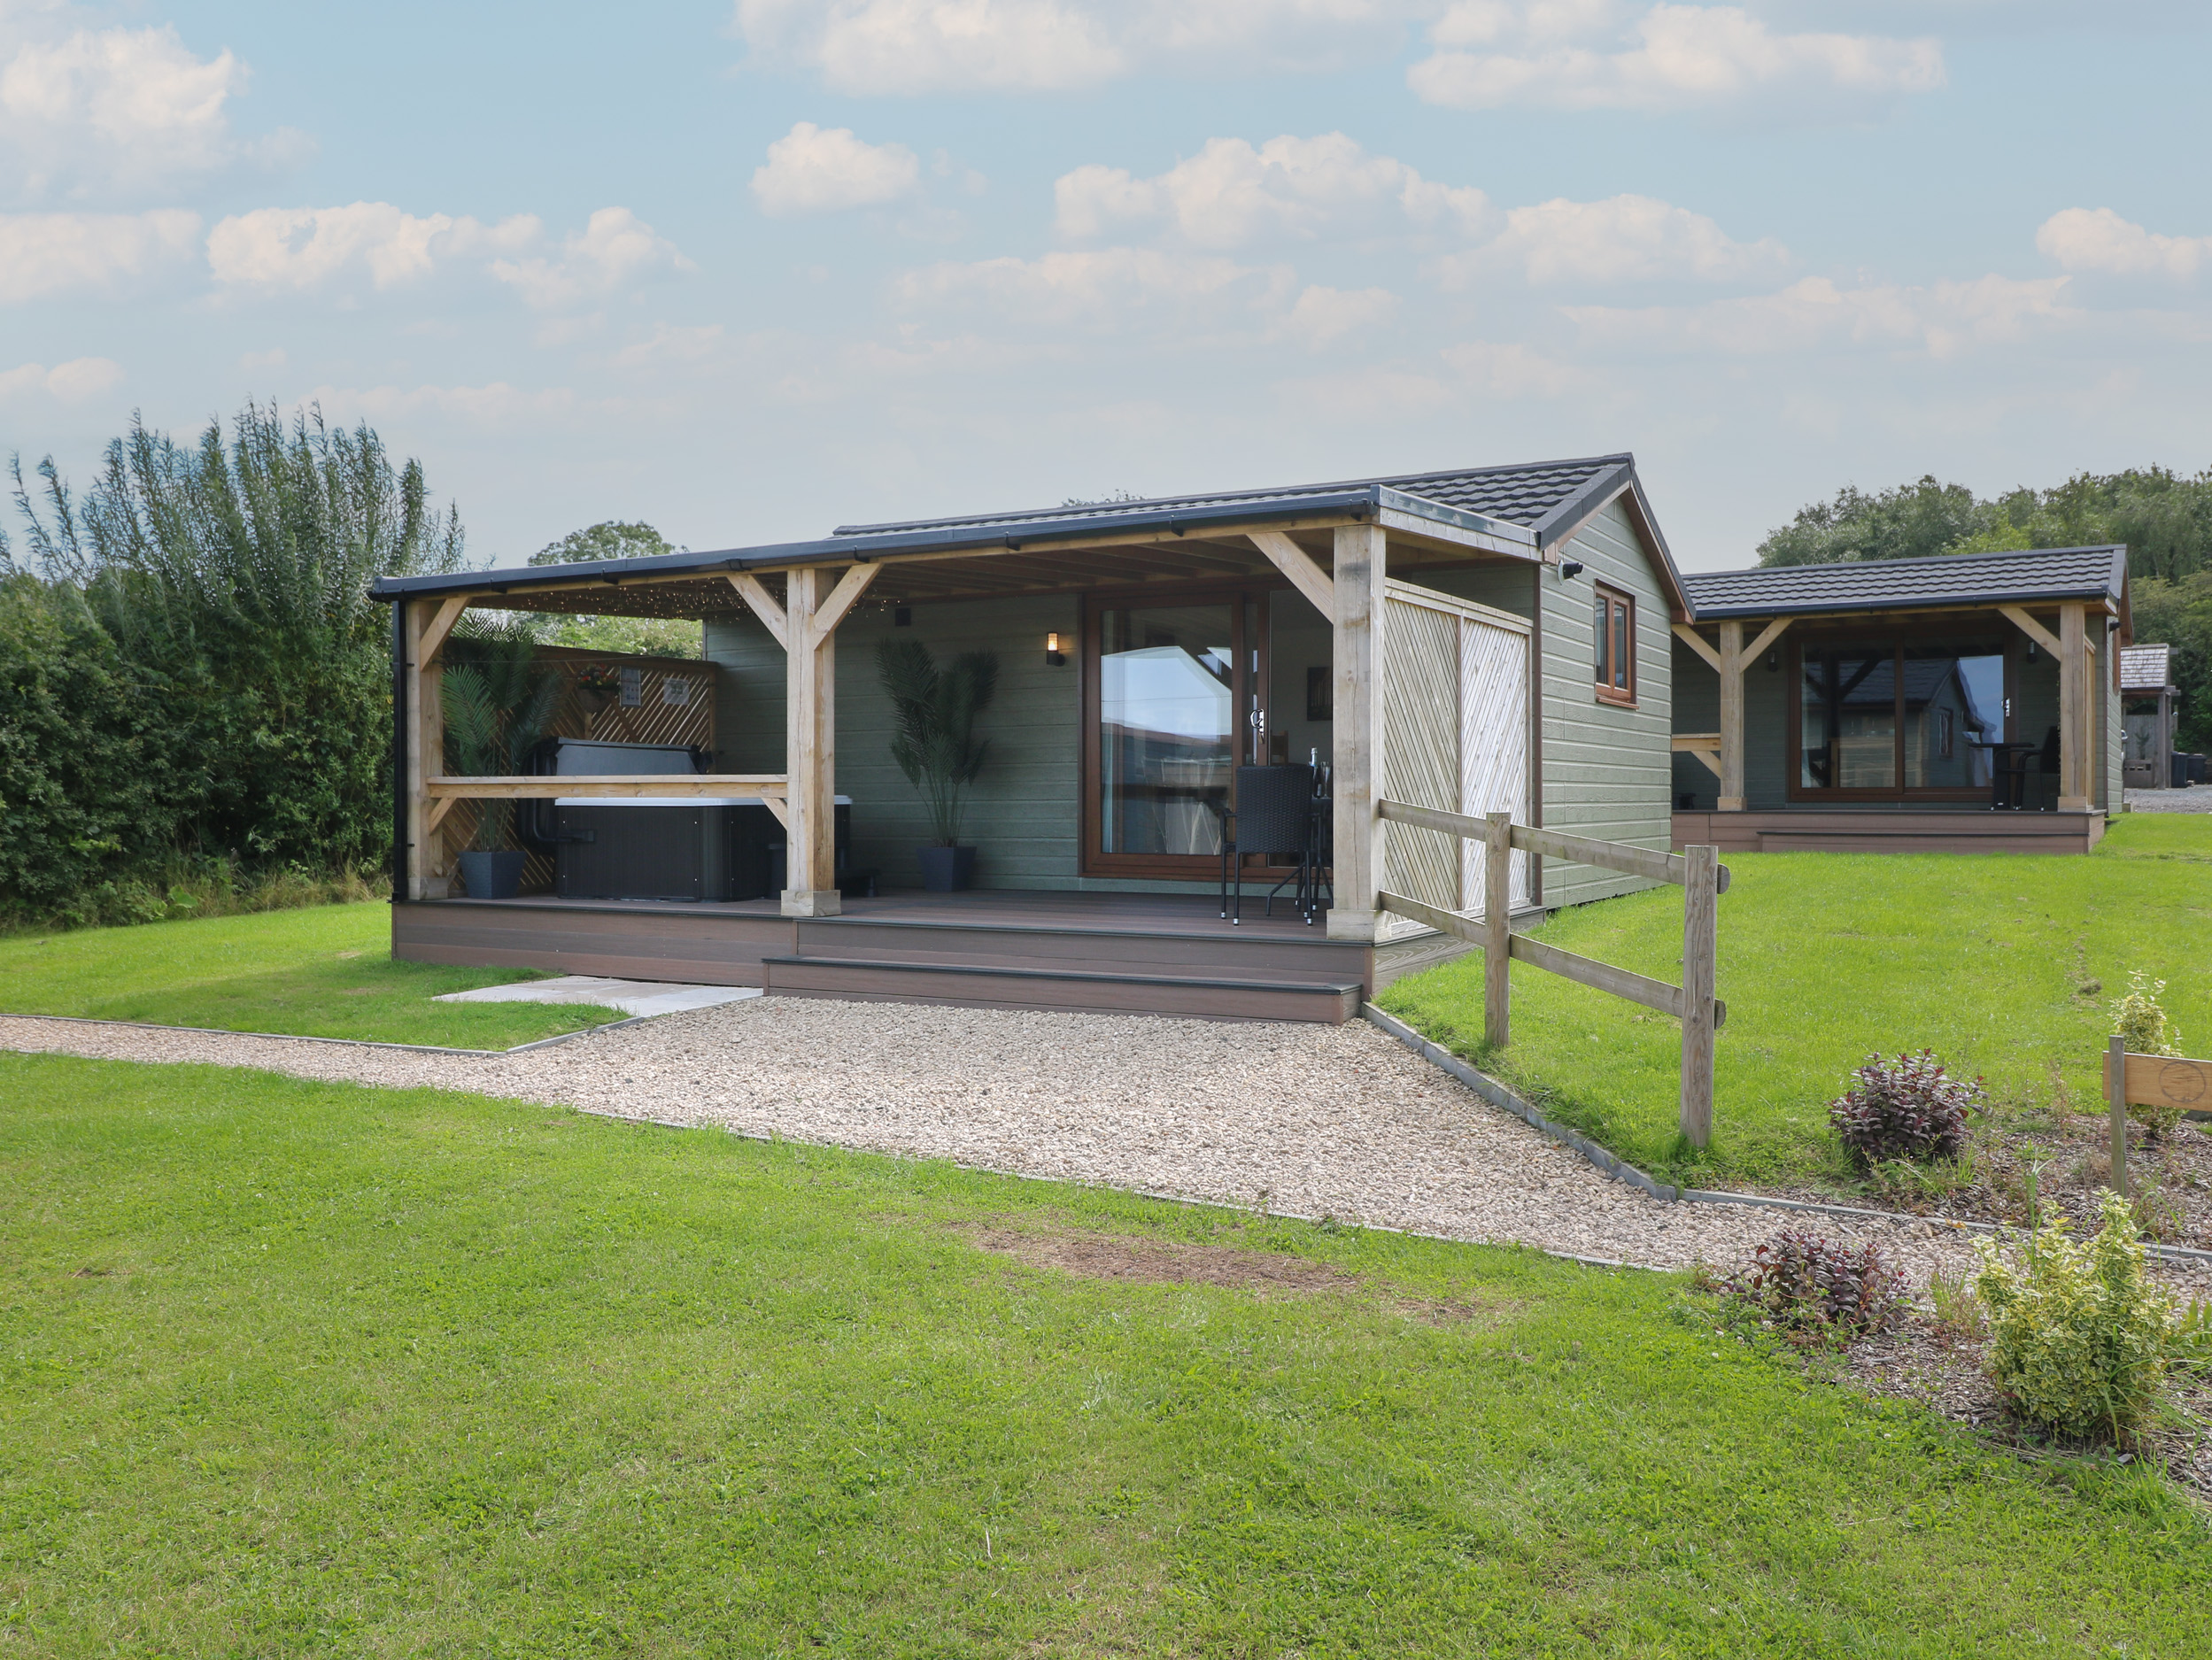 Birch, Donisthorpe, Leicestershire. Adult-only, one-bedroom lodge with hot tub and stylish interior.